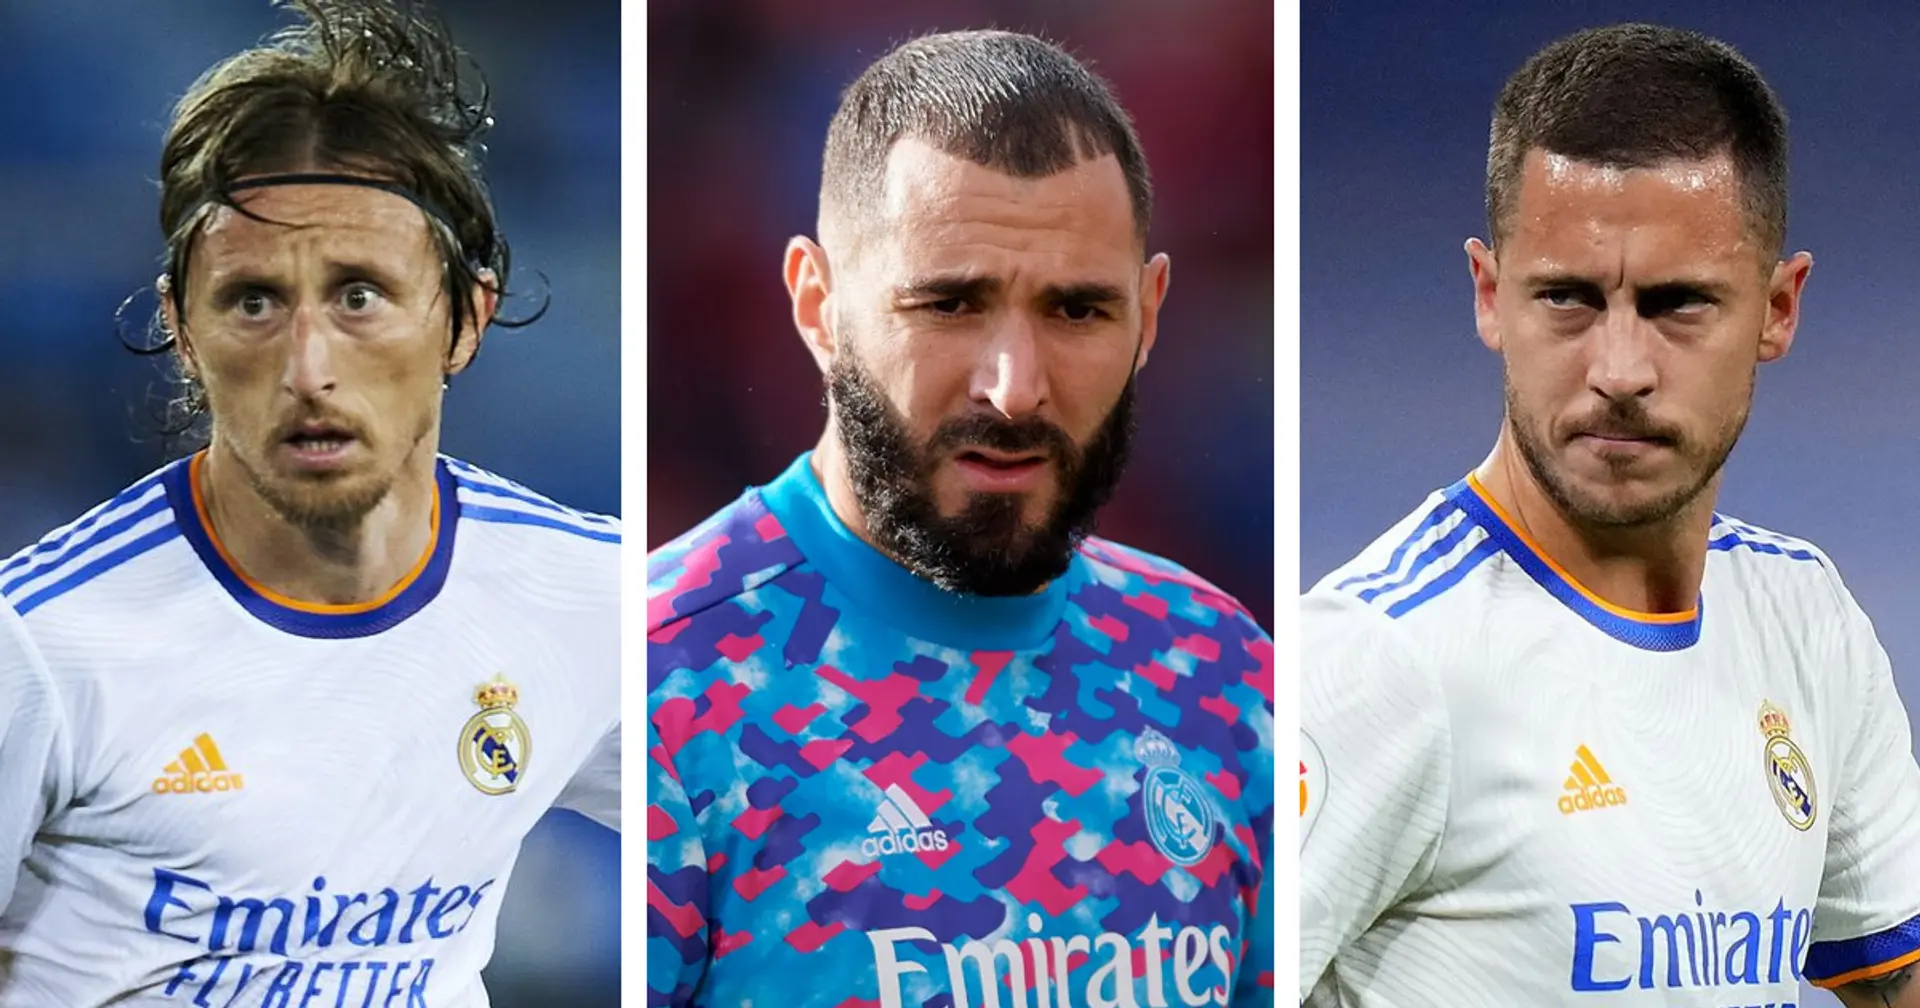 Benzema reacts to Ballon d'or snub and 3 more big stories you might've missed